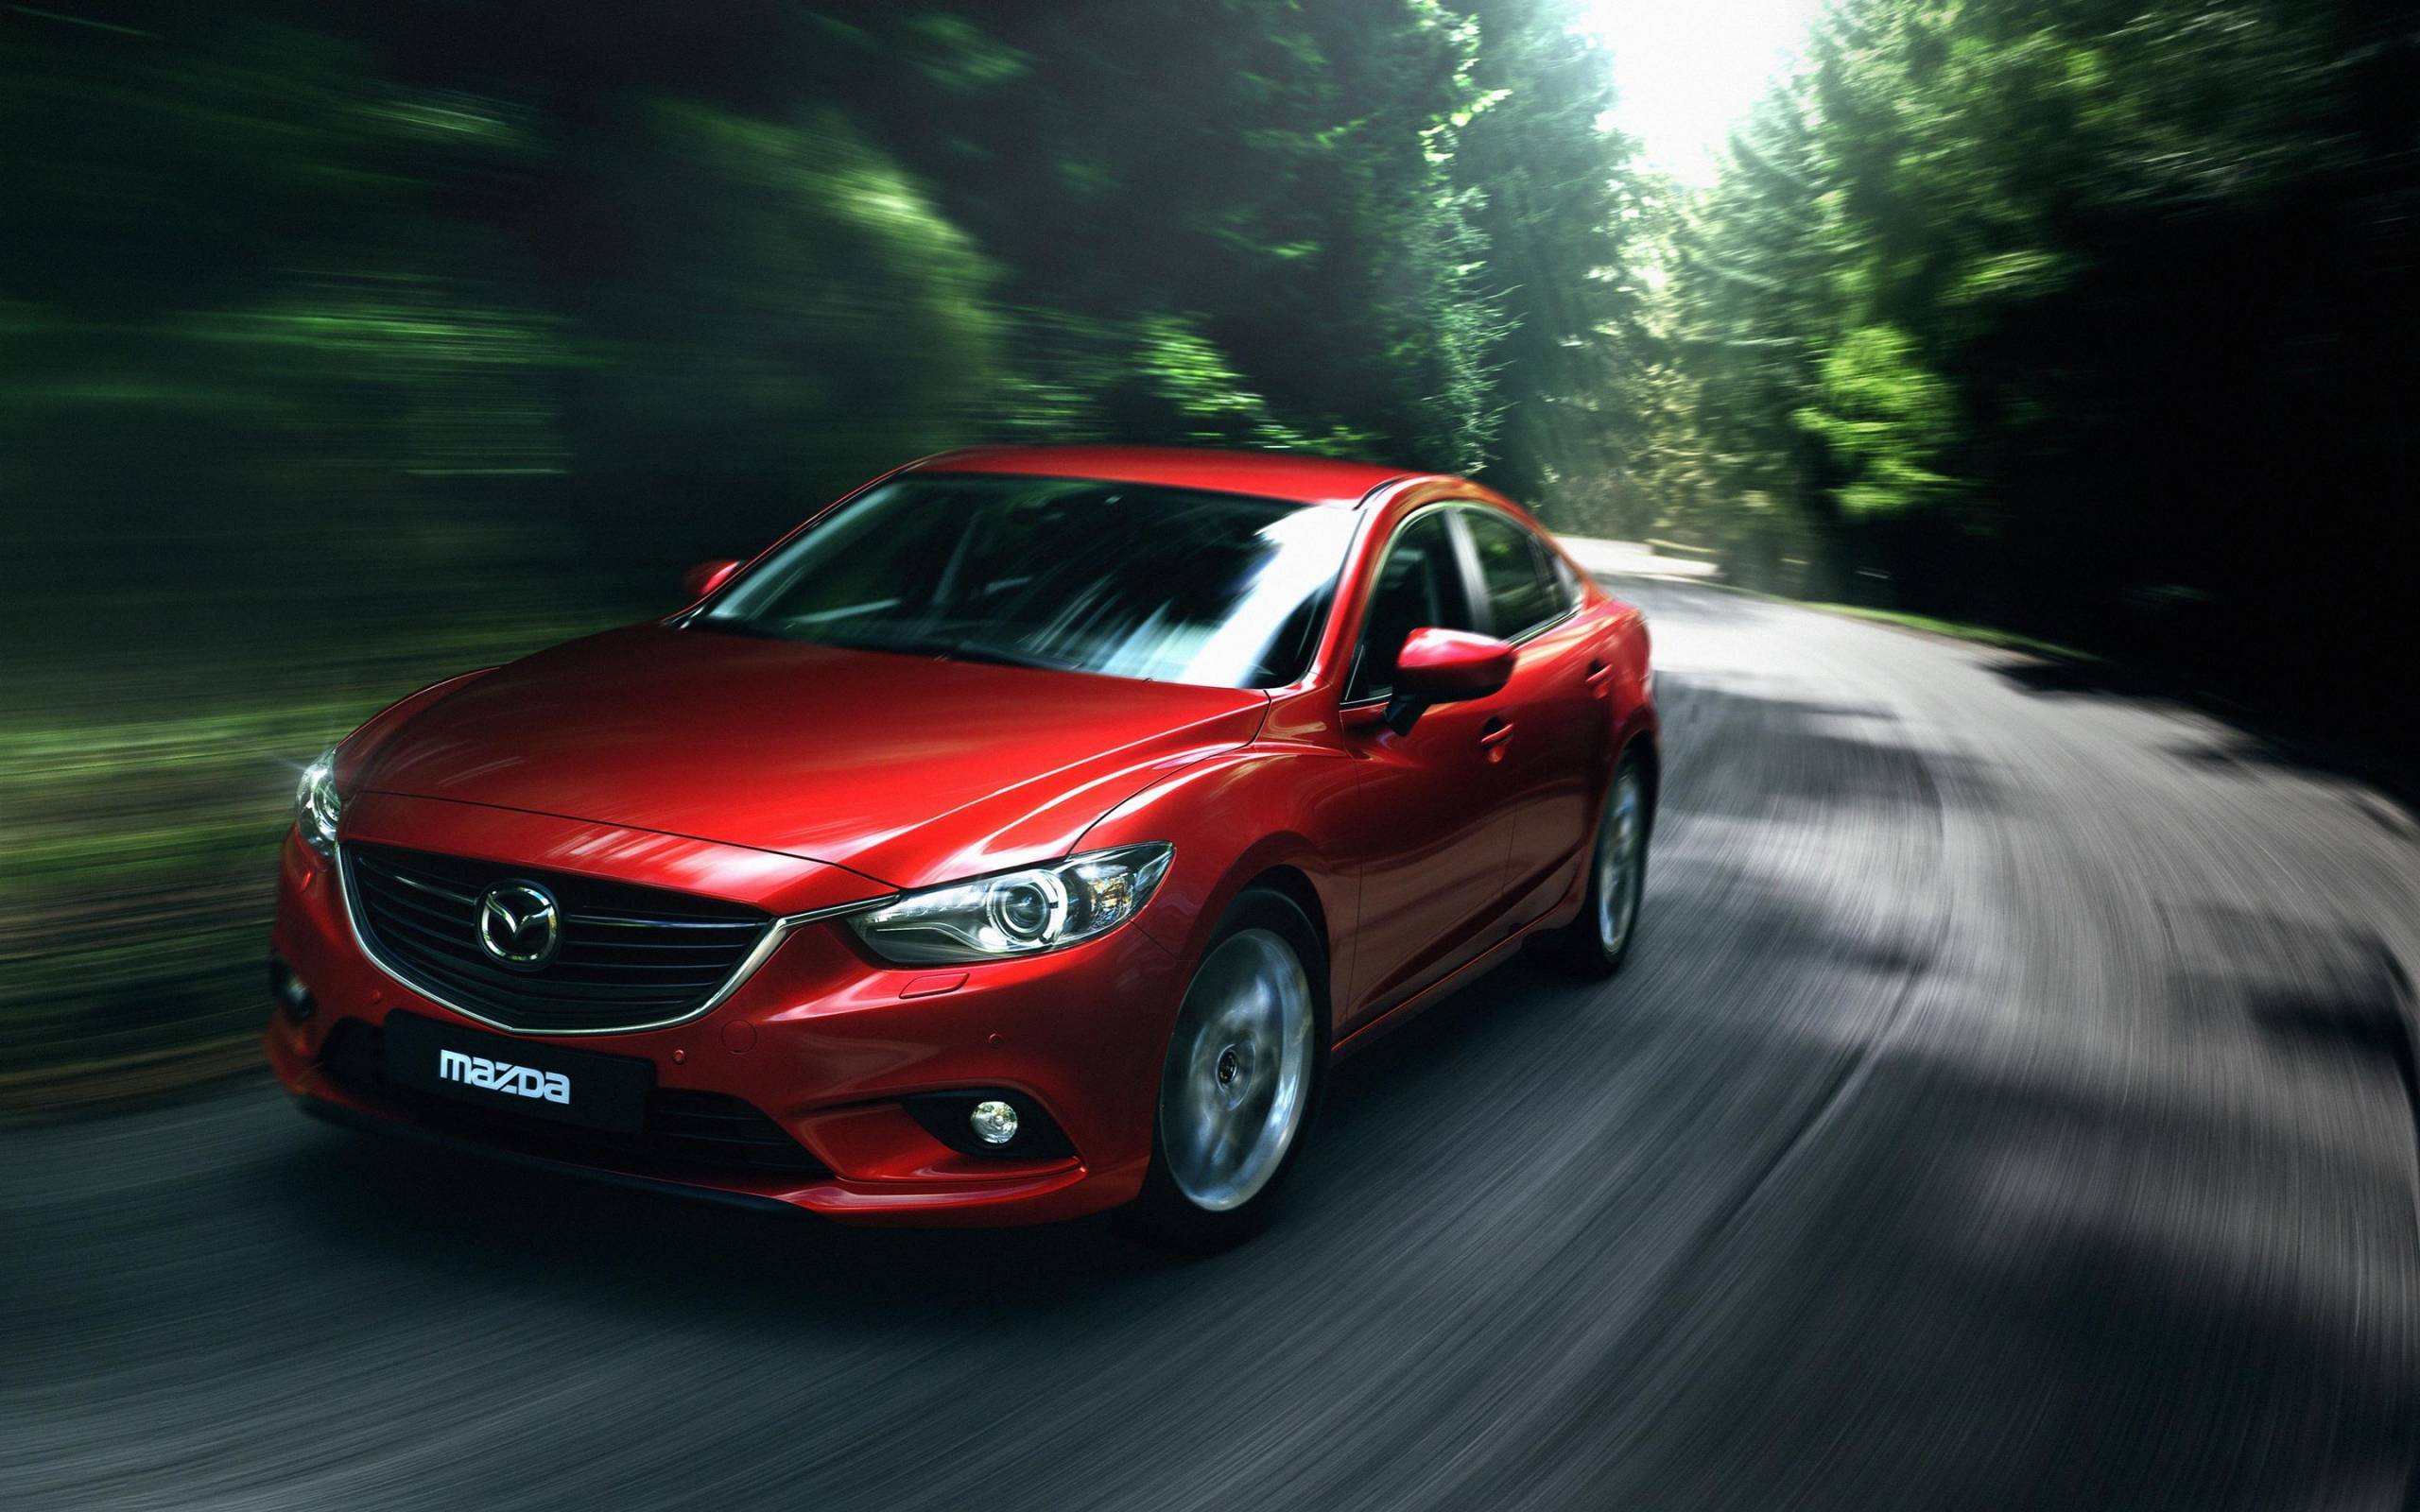 Gorgeous Red Mazda 6 for 2560 x 1600 widescreen resolution